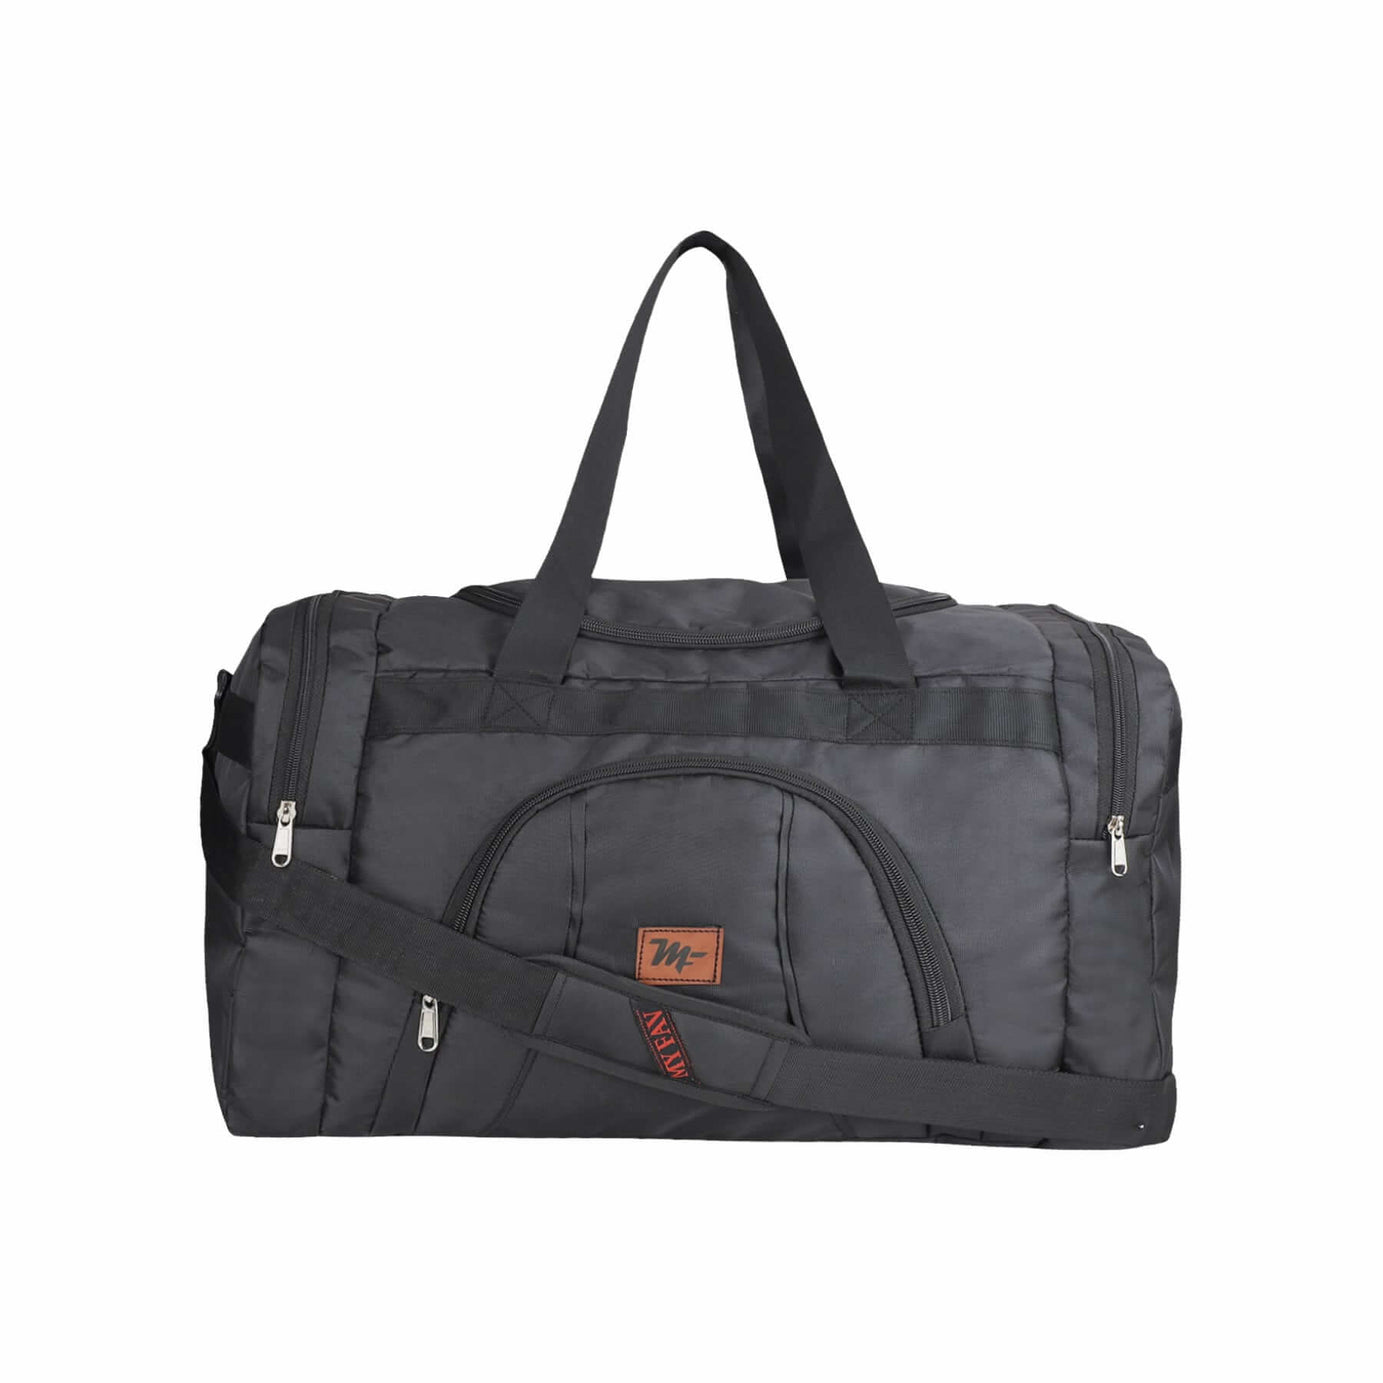 MY FAV Travel Polyester Duffle Bag for Men and Women, Sports, Gym, Outdoor Weekend Bag with Accessories Compartments Waterproof Duffle Bag - 44 litres Capacity